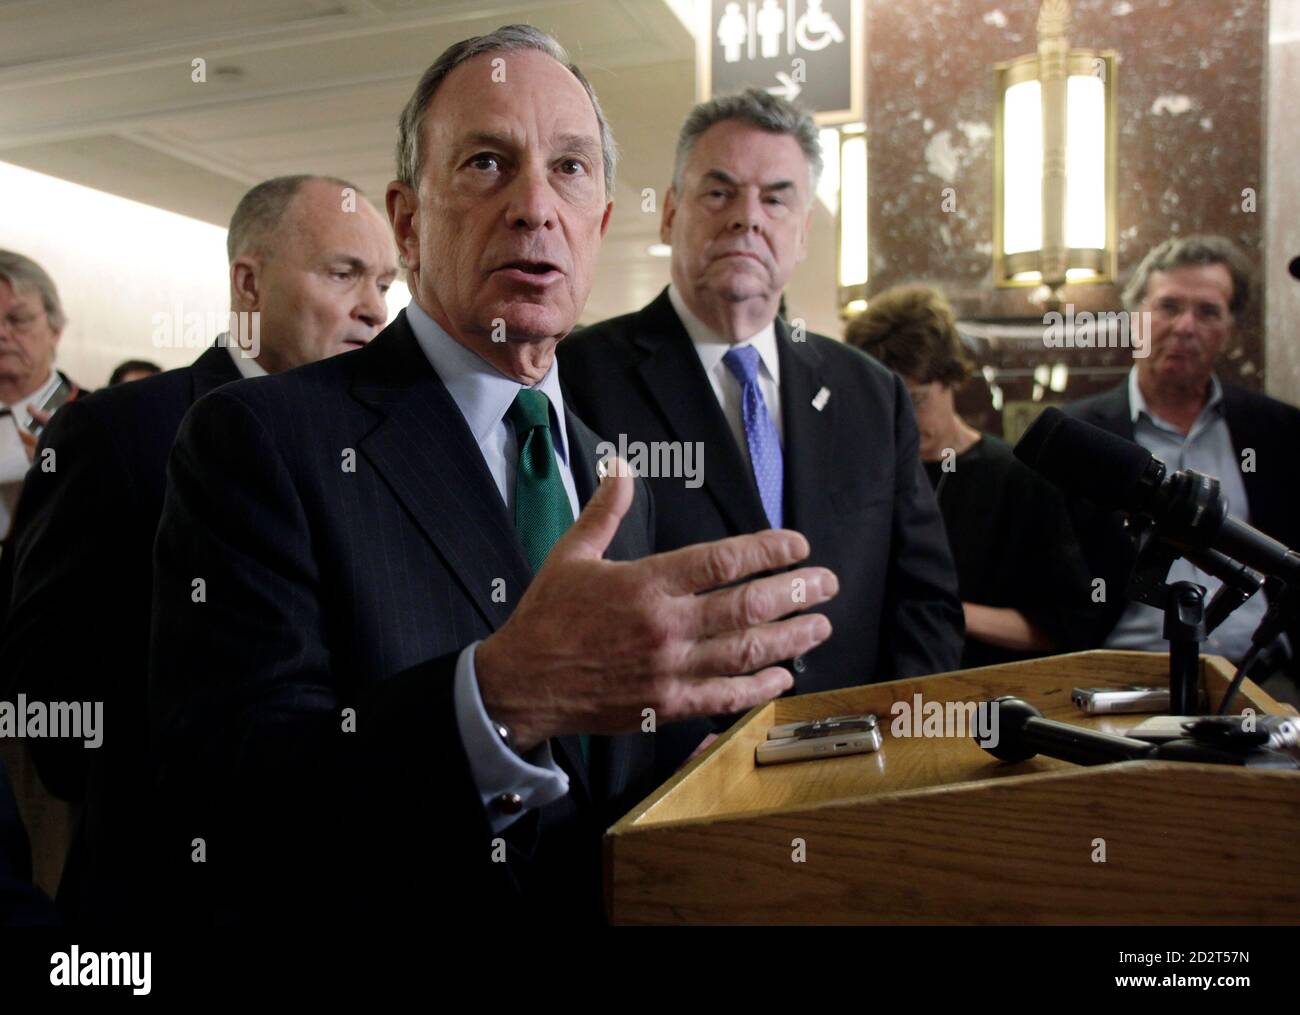 New York City Mayor Michael Bloomberg (C) speaks to reporters with New York City Police Commissioner Raymond Kelly (L) and Rep. Peter King (R-NY) after their testimony before the Senate Homeland Security and Governmental Affairs Committee on Capitol Hill in Washington May 5, 2010. REUTERS/Yuri Gripas (UNITED STATES - Tags: POLITICS) Stock Photo